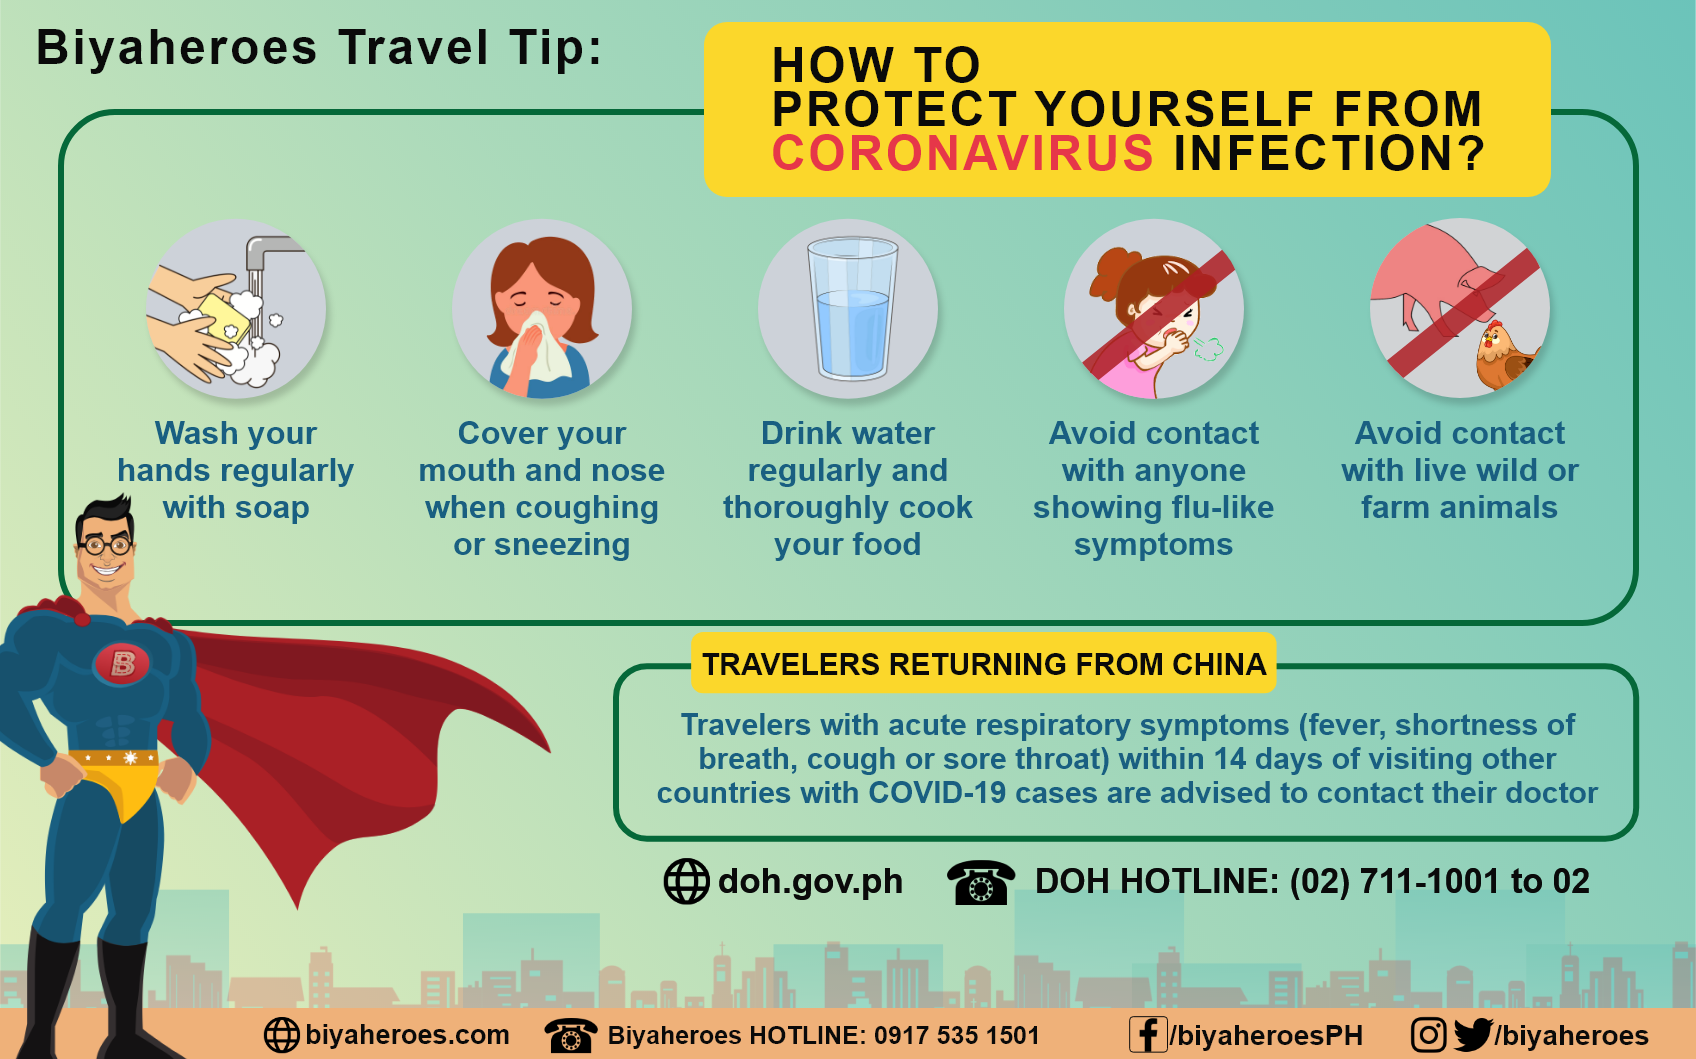 Biyaheroes Travel Tip: Keep safe from COVID-19 while traveling!